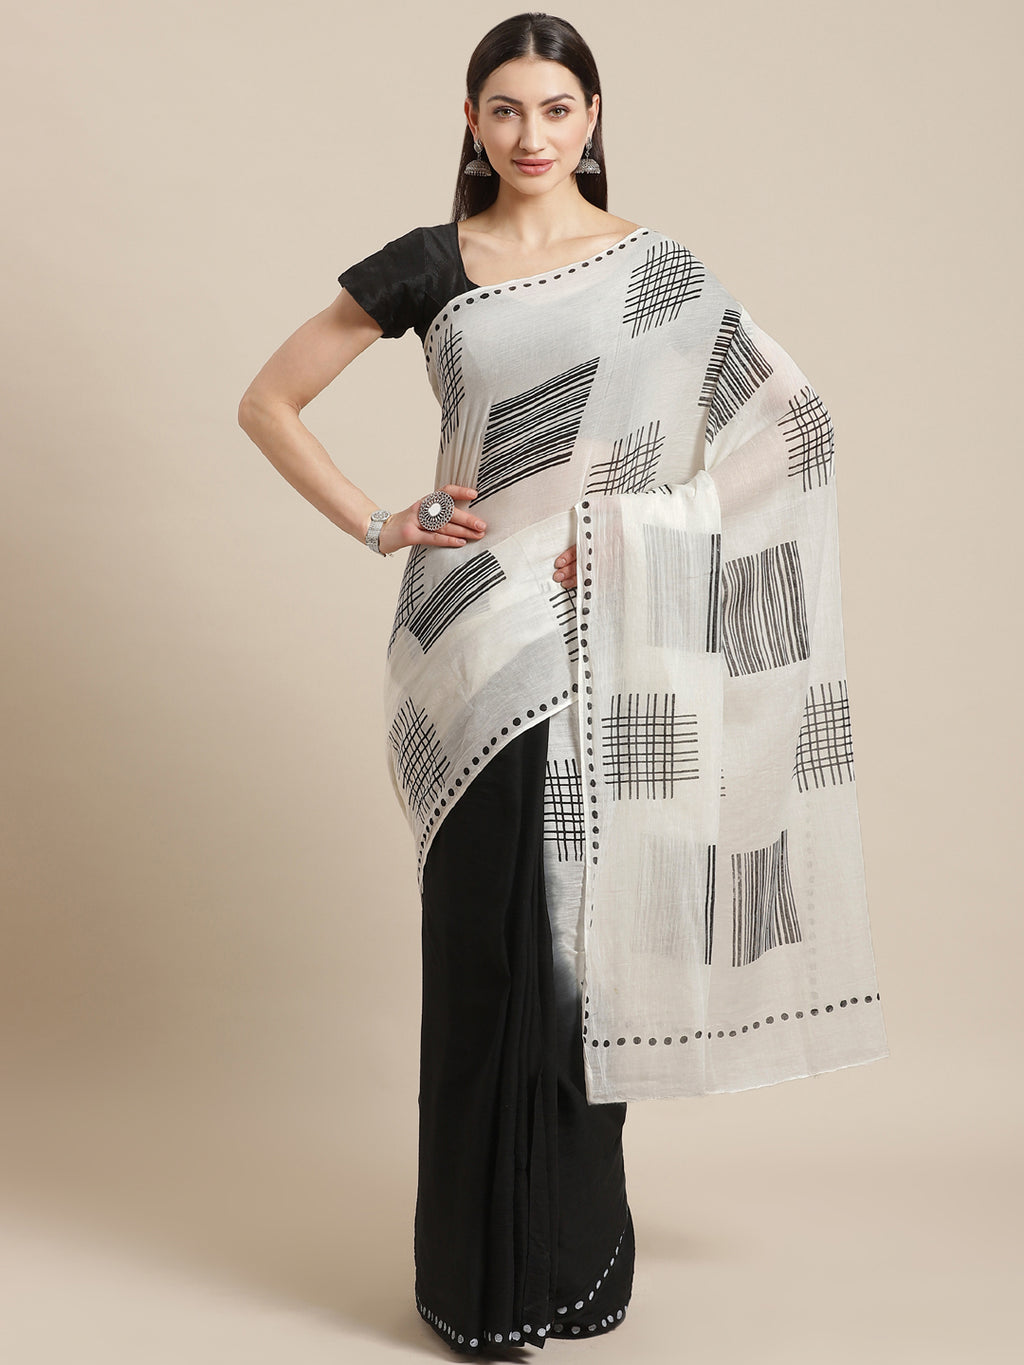 Grey and Black, Kalakari India Cotton Grey Hand crafted saree with blouse HUPASA0020-Saree-Kalakari India-HUPASA0020-Cotton, Geographical Indication, Hand Block, Hand Crafted, Heritage Prints, Natural Dyes, Red, Sarees, Sustainable Fabrics, Woven, Yellow-[Linen,Ethnic,wear,Fashionista,Handloom,Handicraft,Indigo,blockprint,block,print,Cotton,Chanderi,Blue, latest,classy,party,bollywood,trendy,summer,style,traditional,formal,elegant,unique,style,hand,block,print, dabu,booti,gift,present,glamorous,